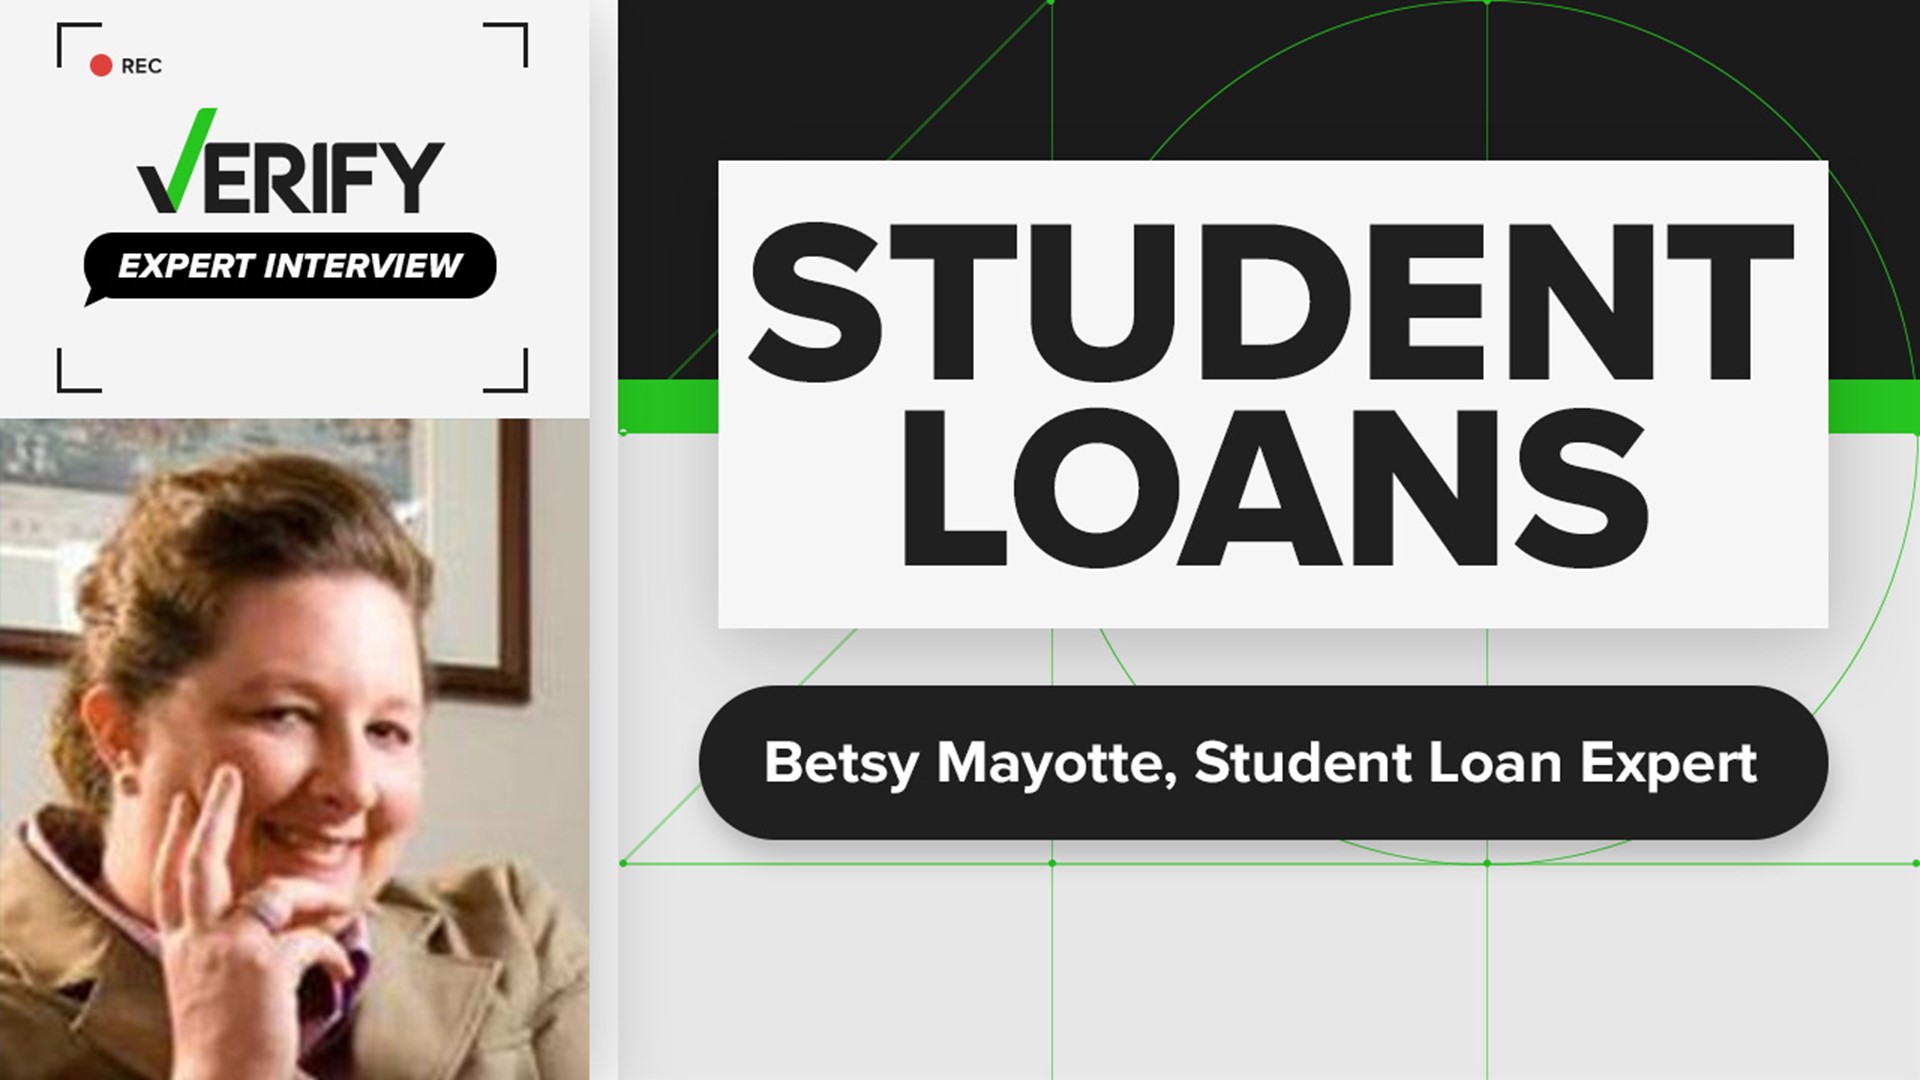 Student loan expert, Betsy Mayotte, speaks with VERIFY about Biden's student loan forgiveness plan. She talks on who is affected and about Pell grants.